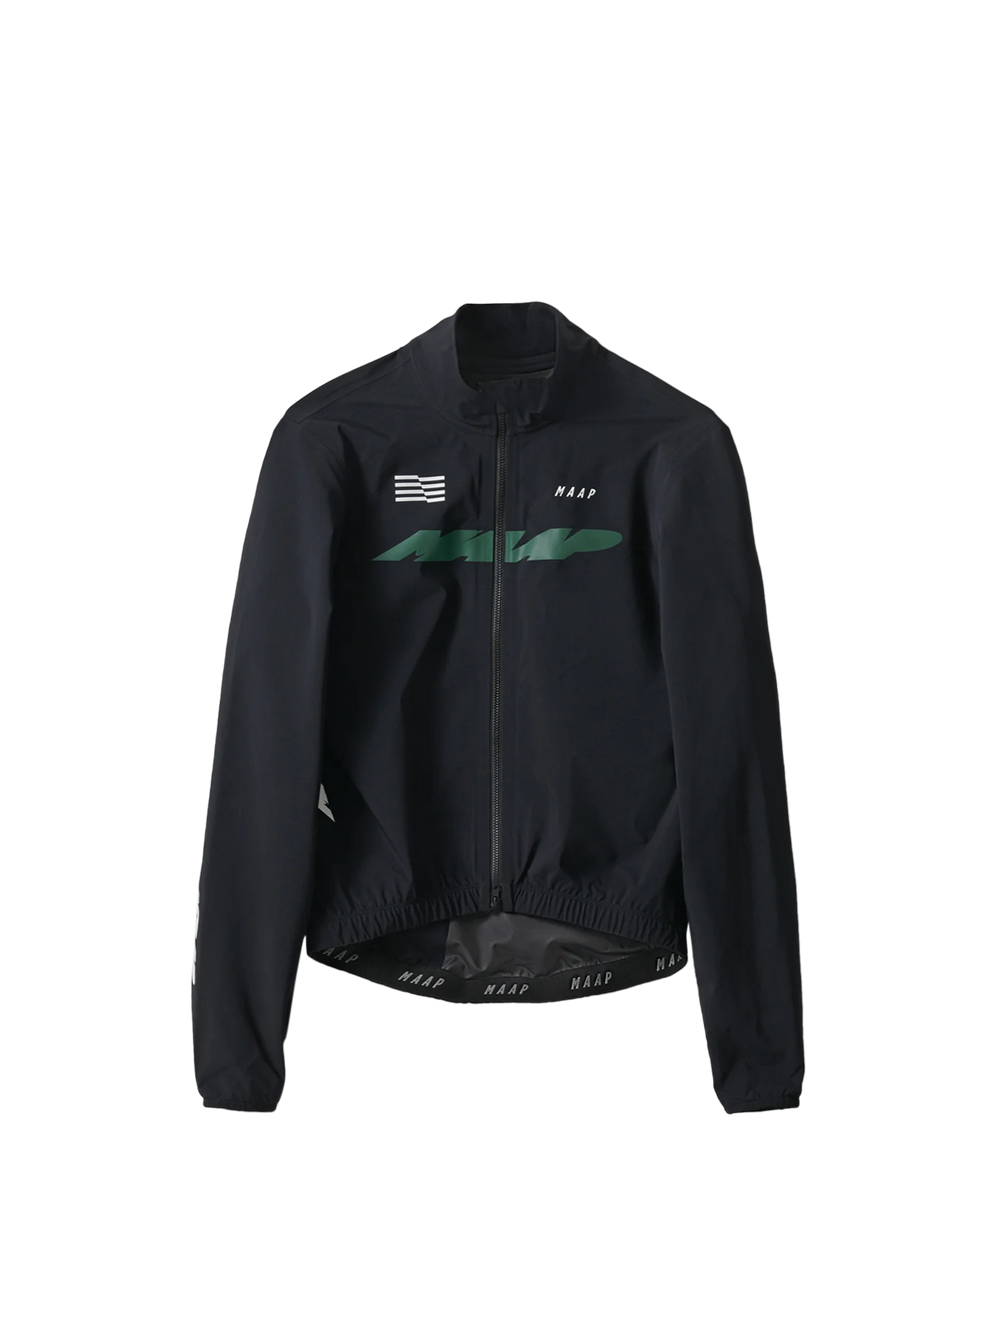 Product Image for Eclipse Prime Jacket